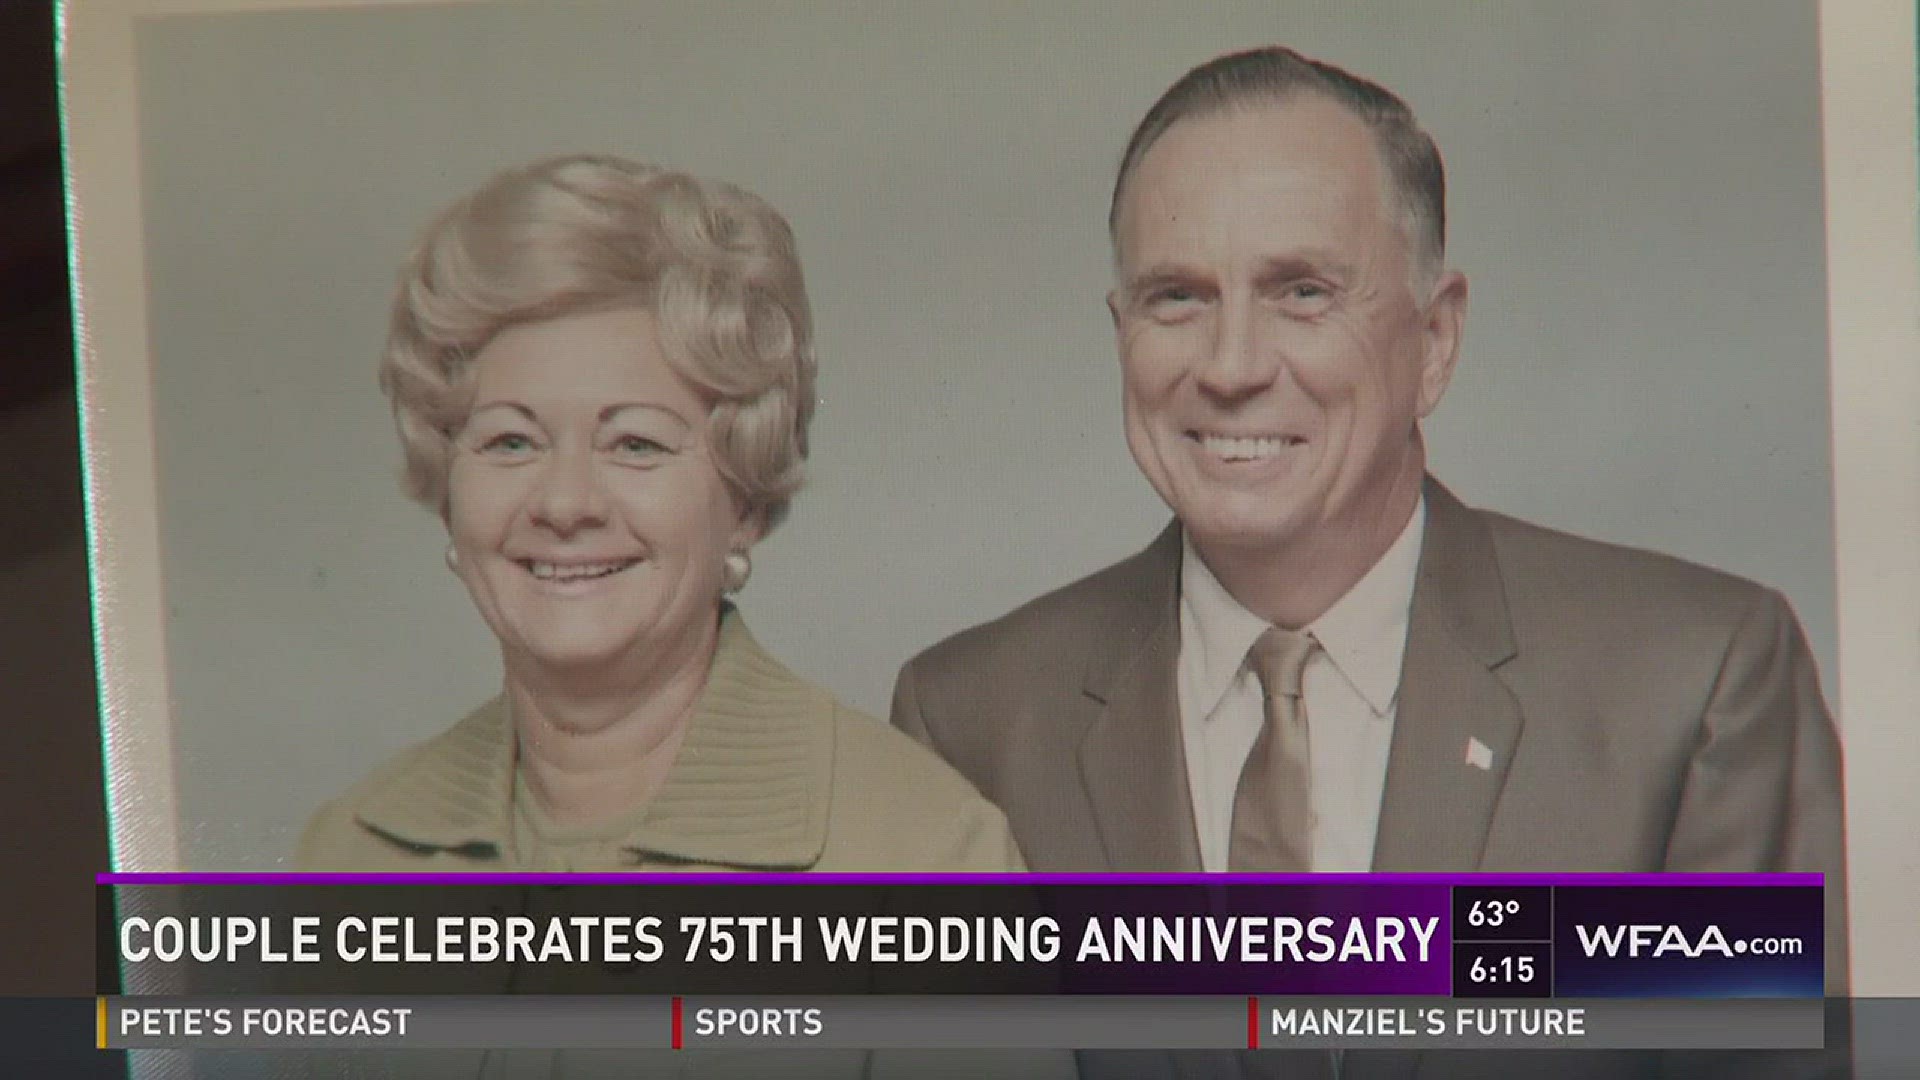 After three-quarters of a century together, Jack and Lucille Cannon share their tips for a rock-solid marriage.